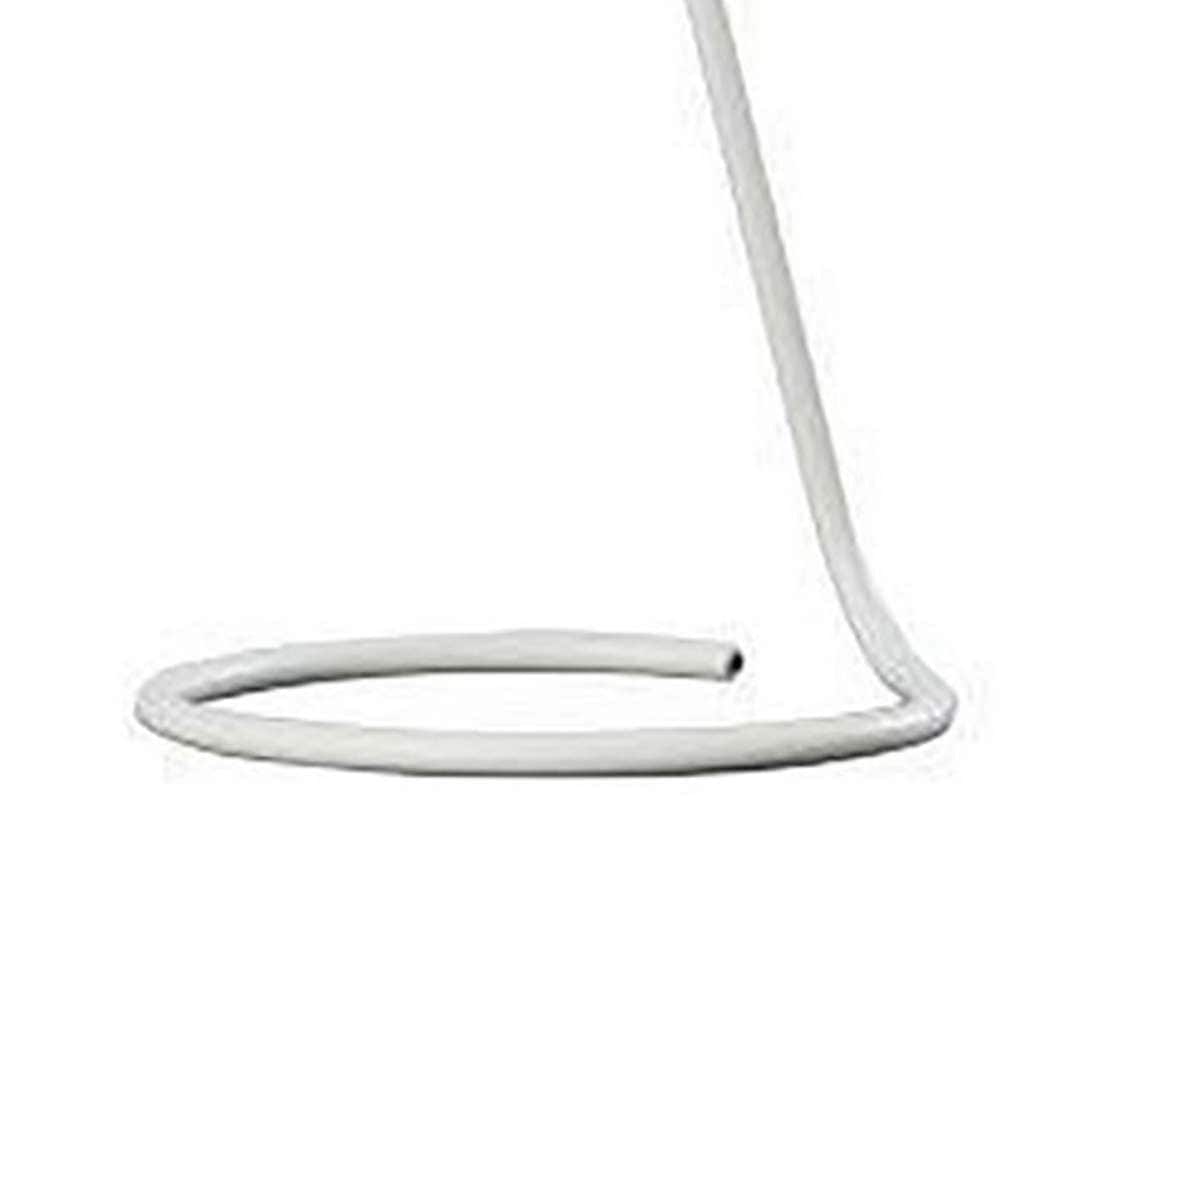 Benzara Desk Lamp With Pendulum Style And Flat Saucer Shade, White By Benzara Desk Lamps BM240387